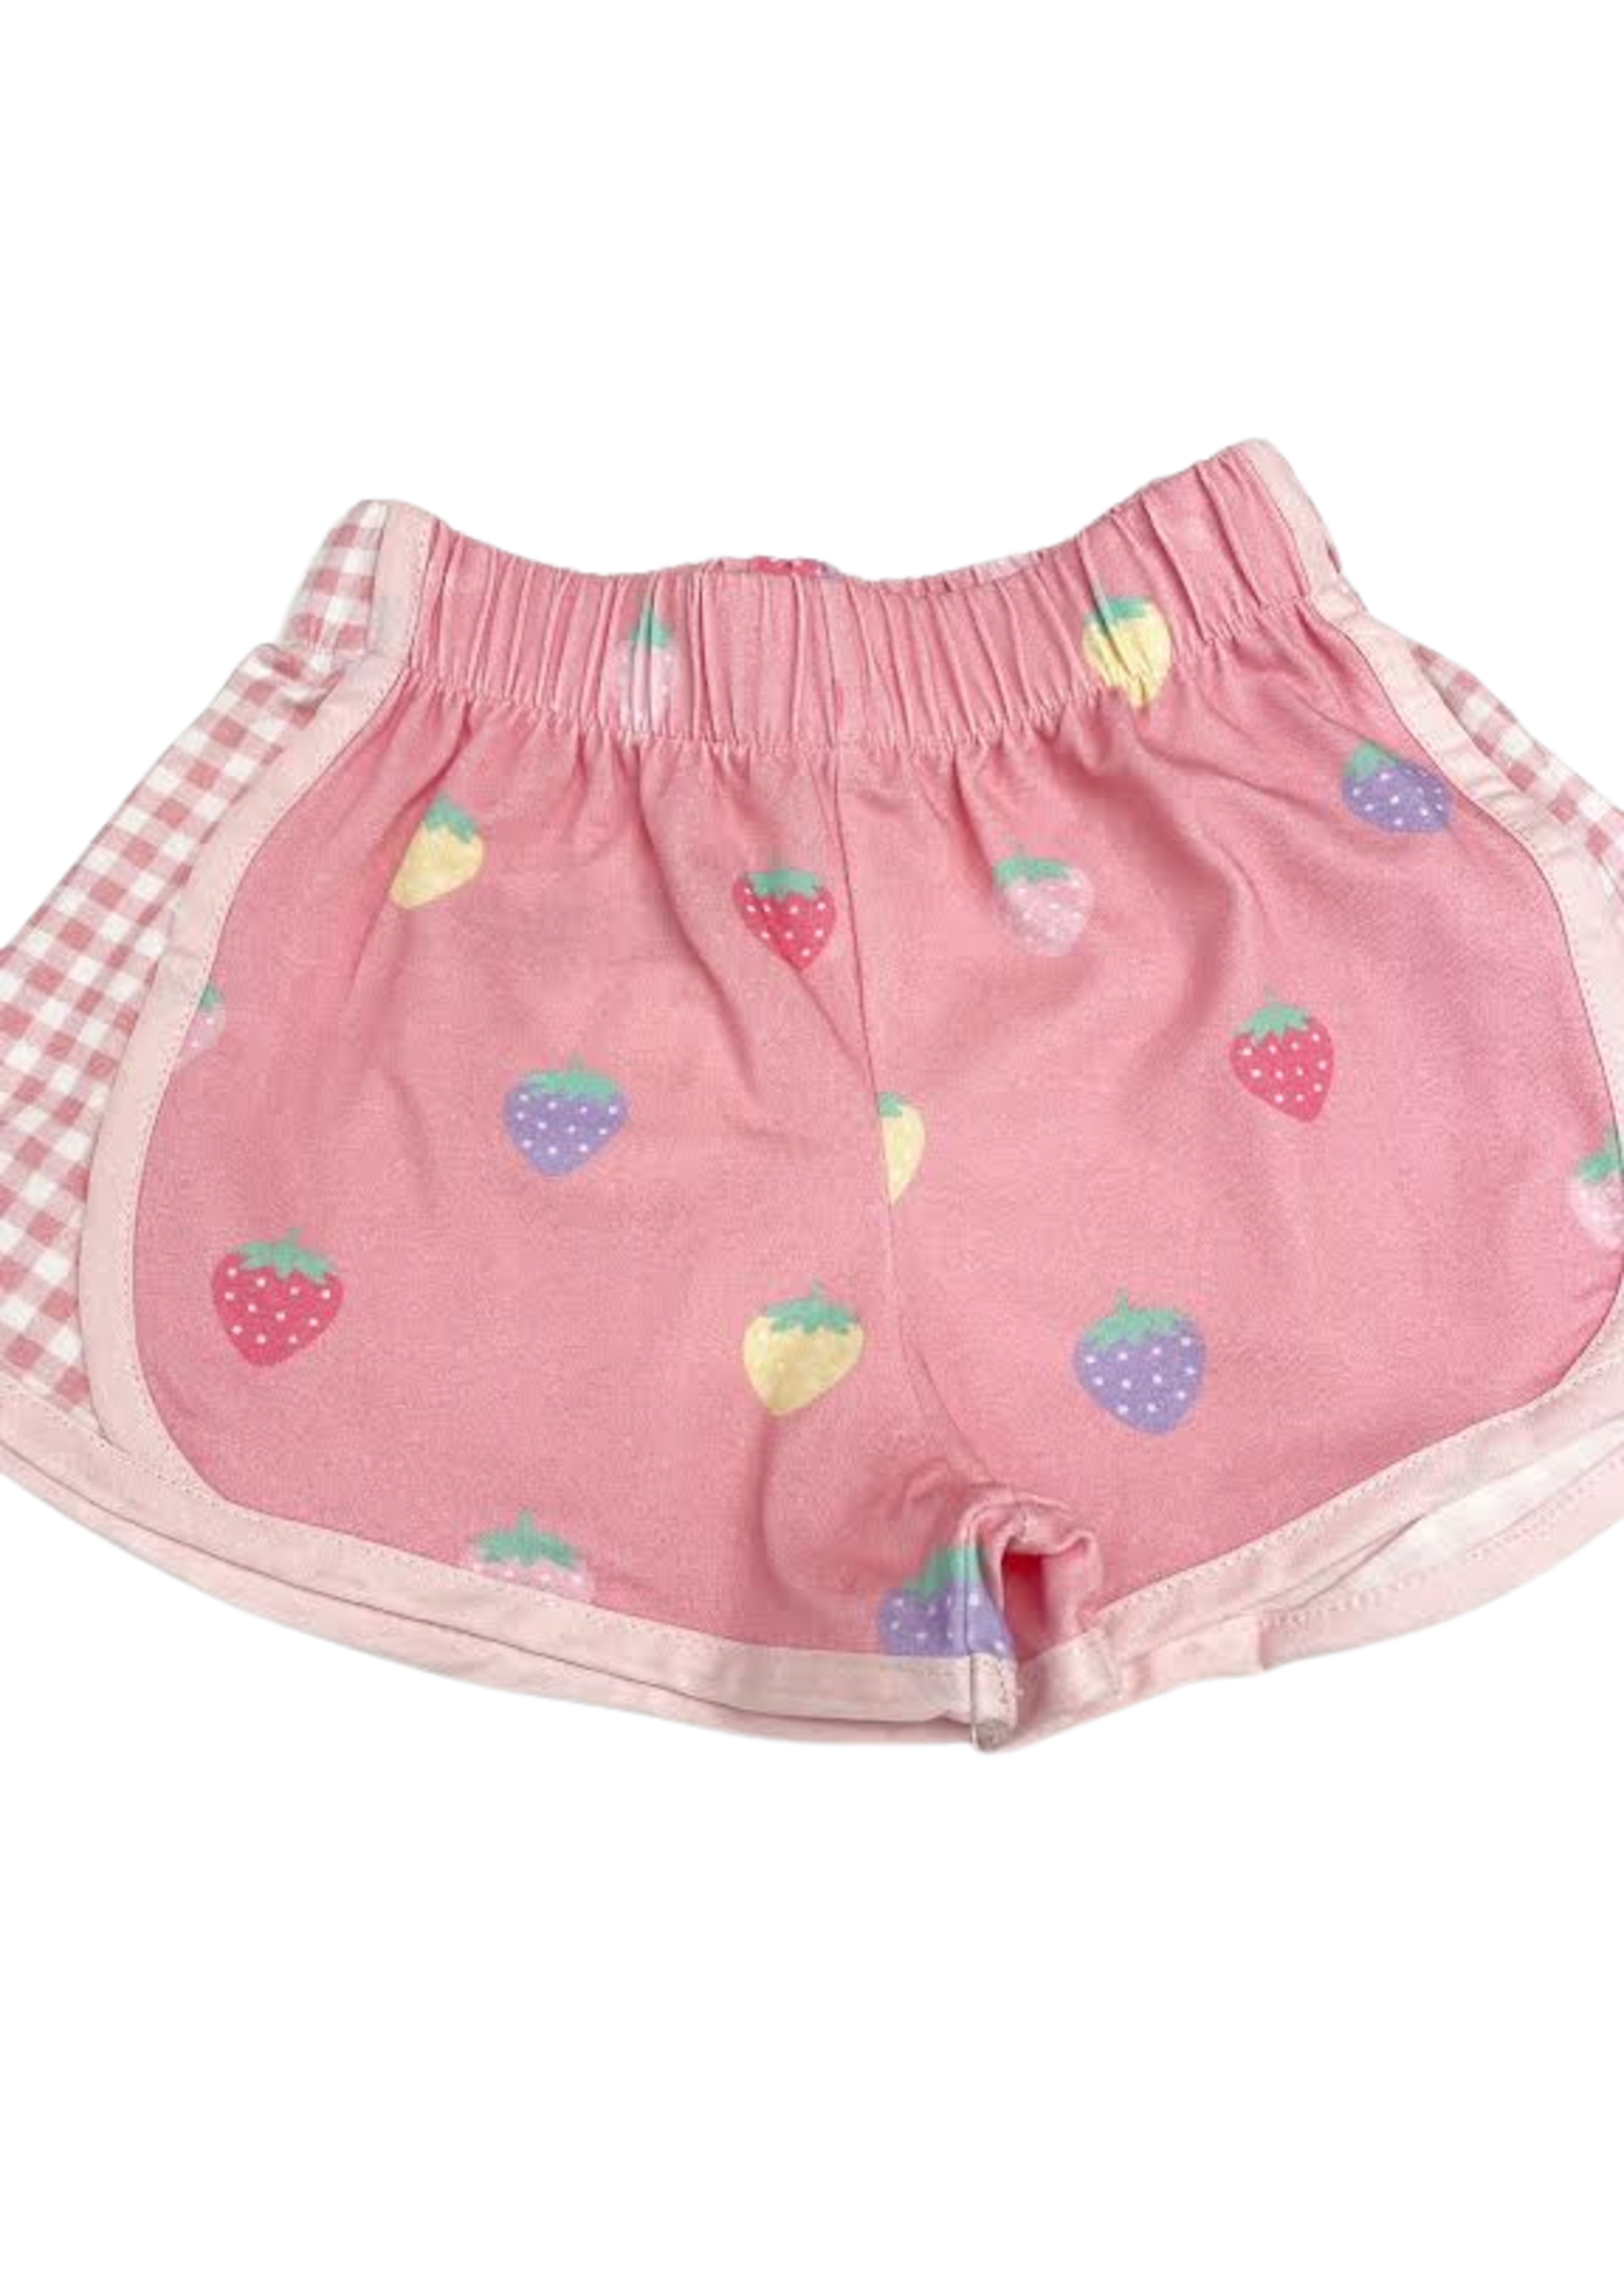 Sal and Pimenta Sal & Pimenta Pastel Patch Sporty Shorts